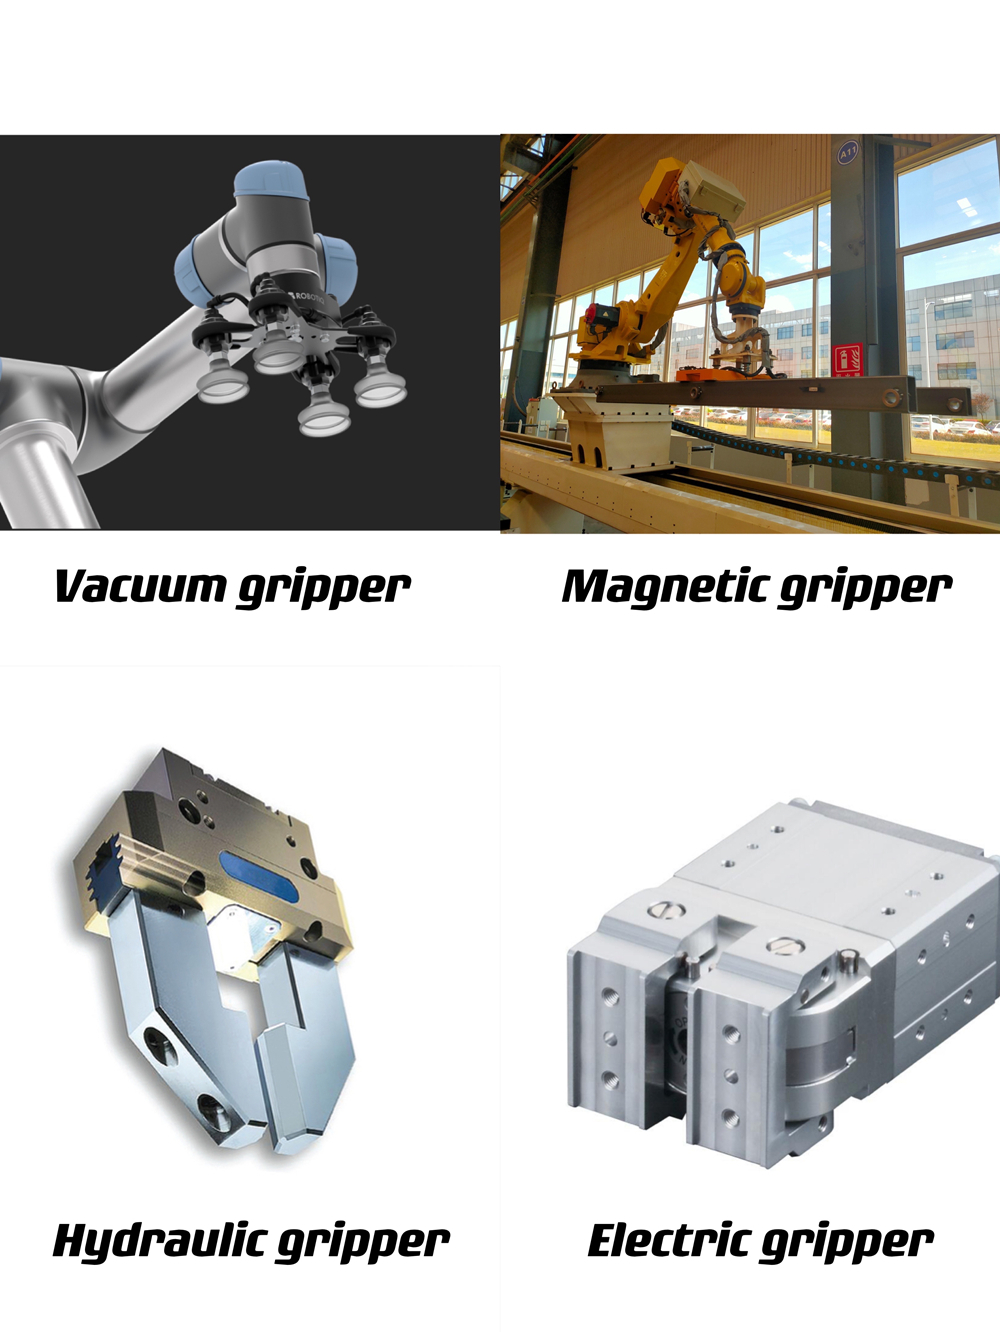 Types of grippers used in manufacturing